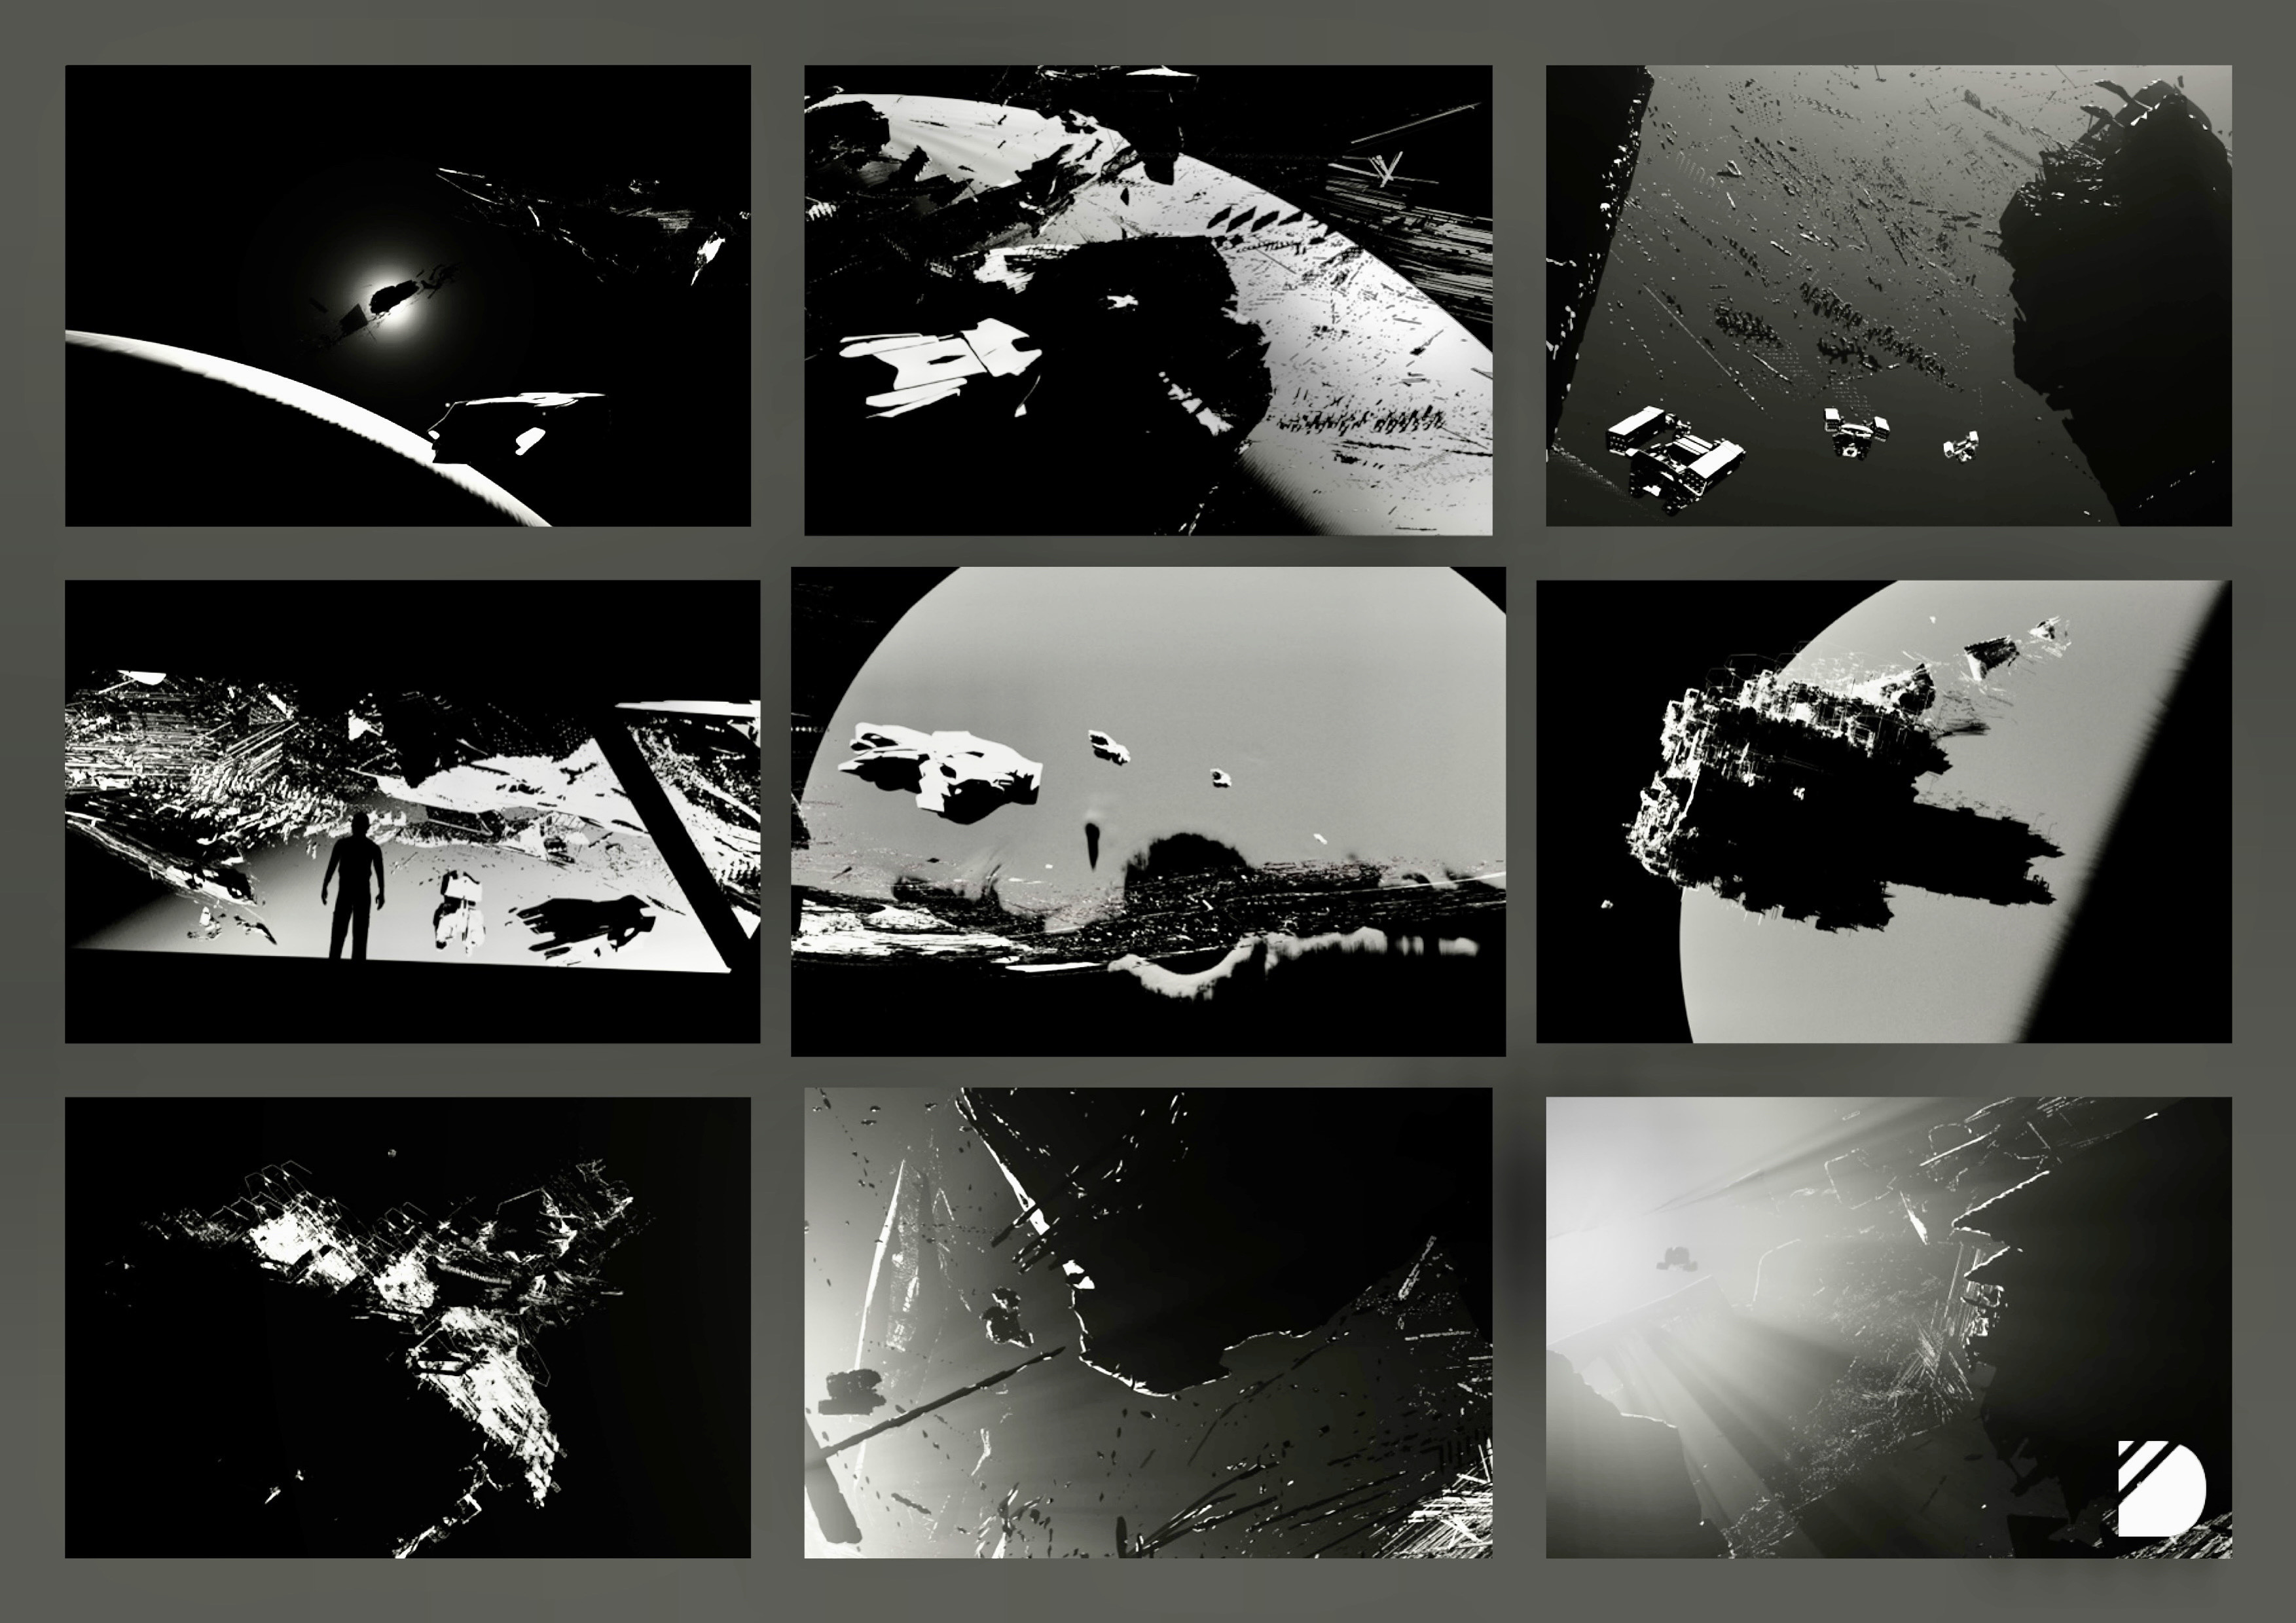 A Sequence of some epic space debris